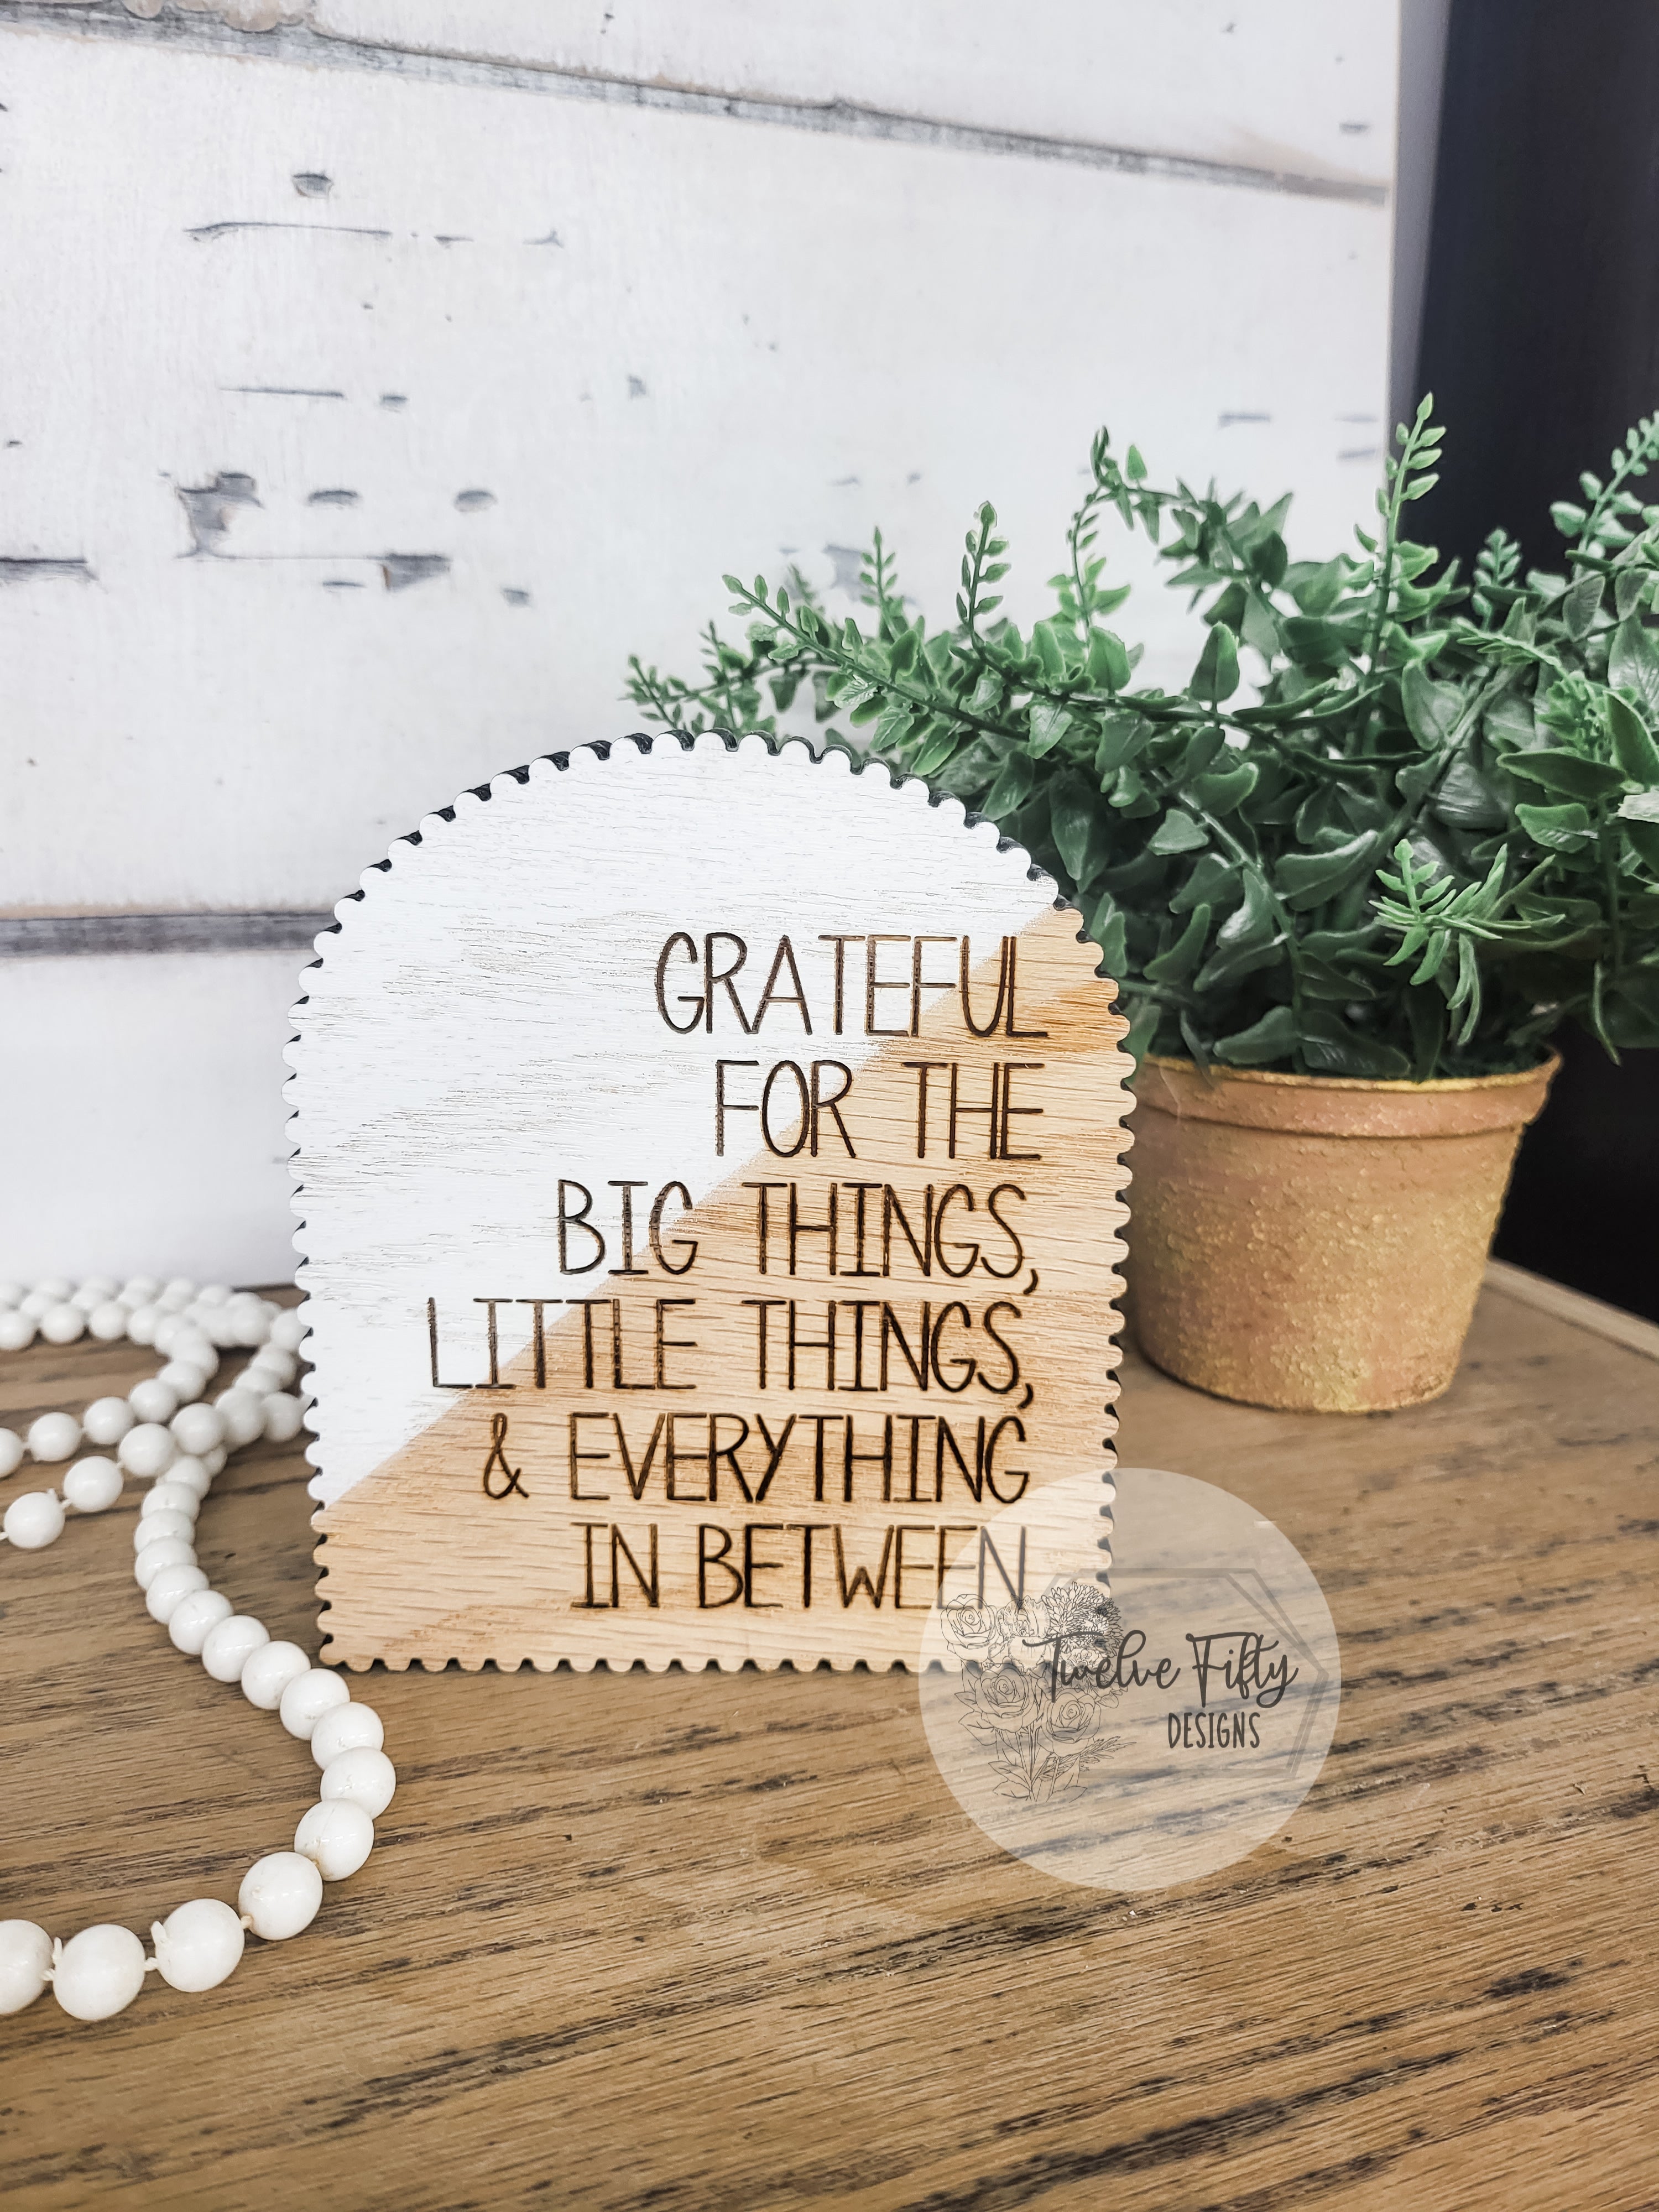 Be Grateful - Even for the Small Things